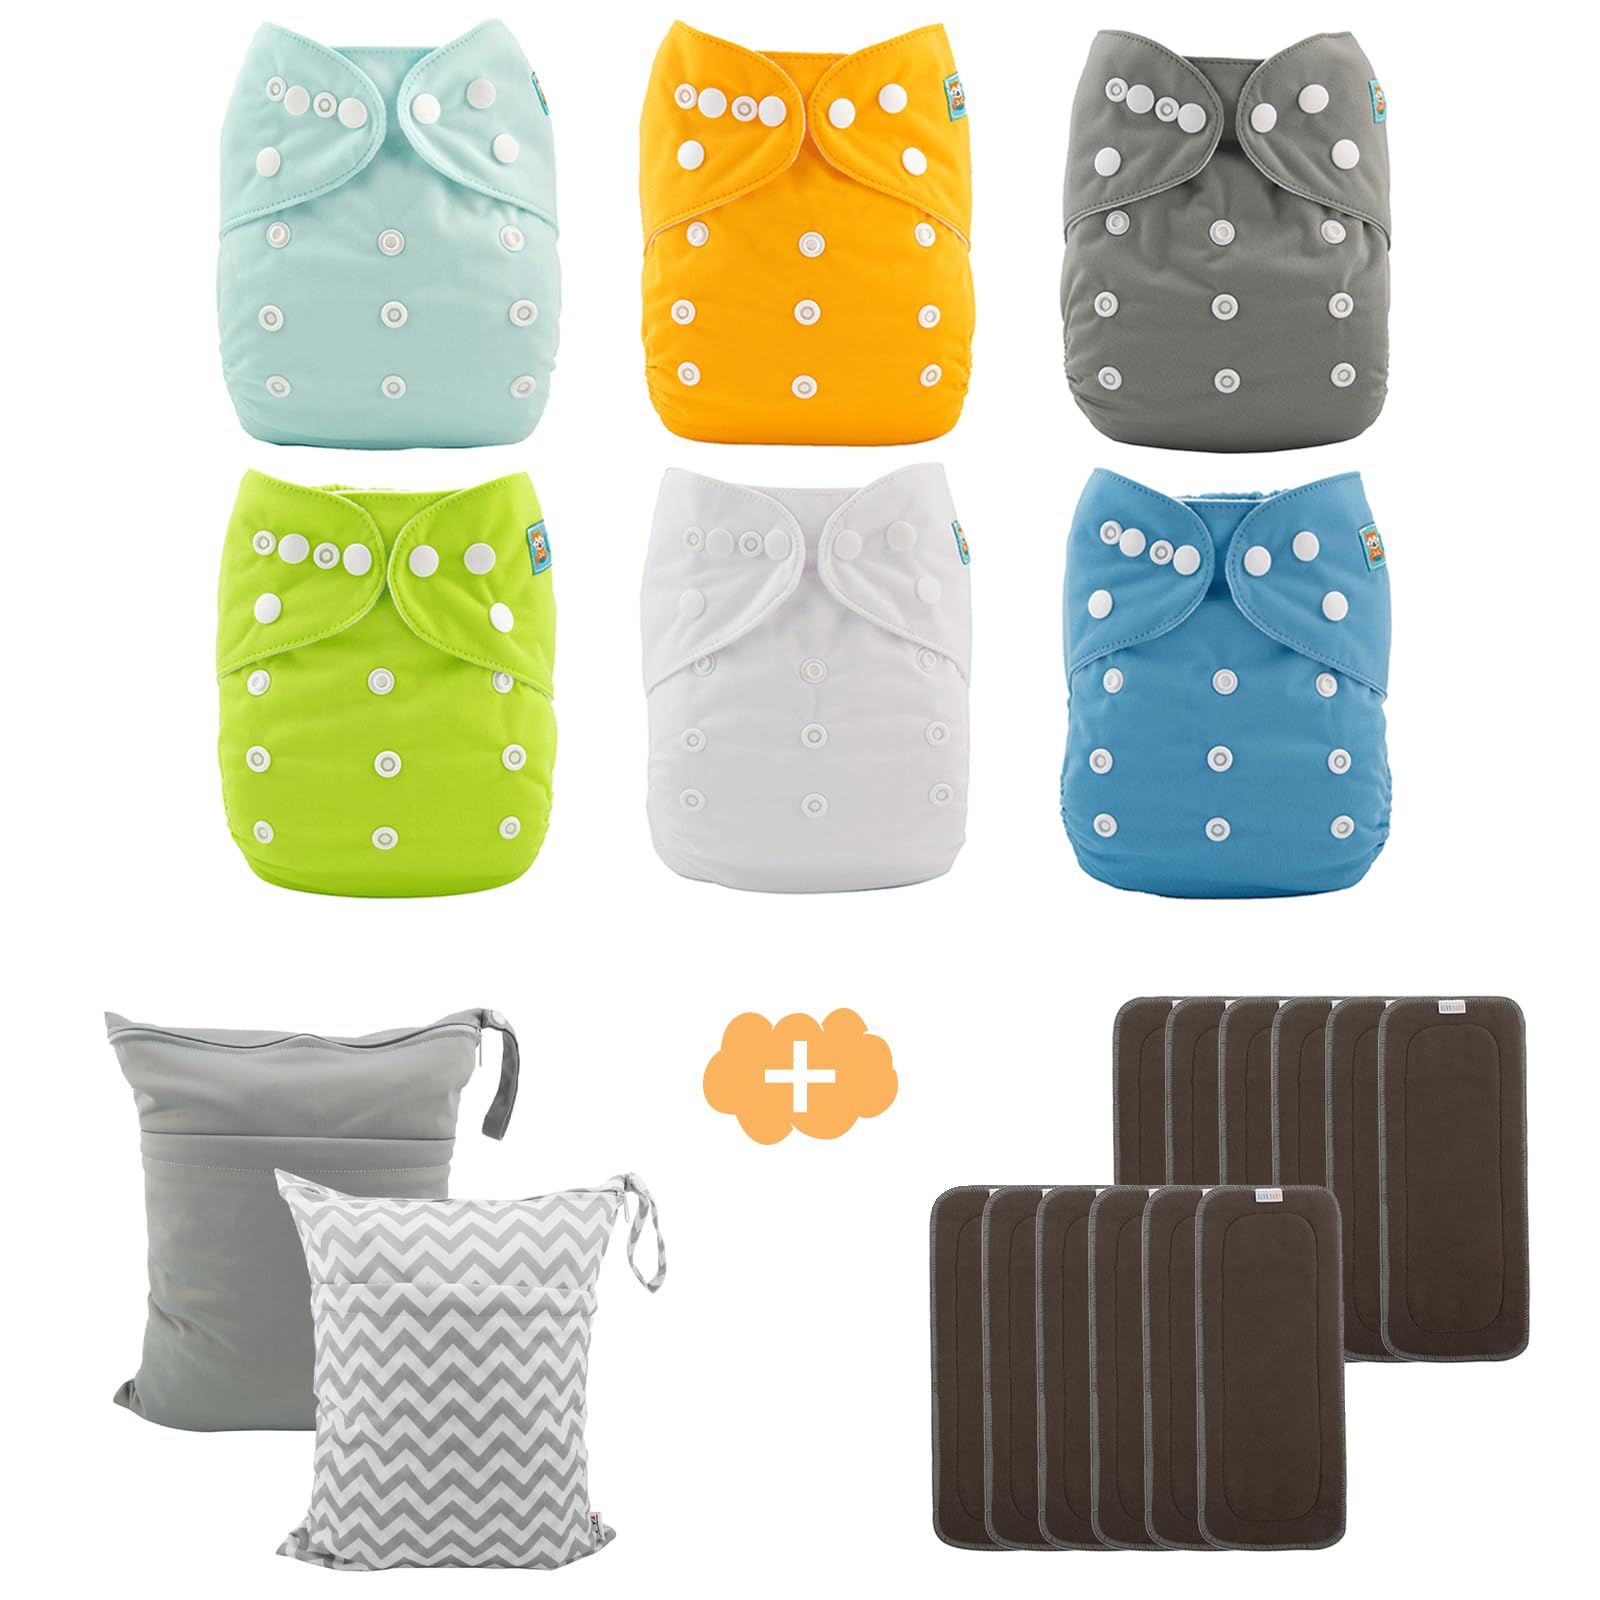 ALVABABY 6 Pack Baby Cloth Diapers with 12 pcs 5-Layer Rayon Charcoal Bamboo Inserts and 2pcs Wet Dry Bags